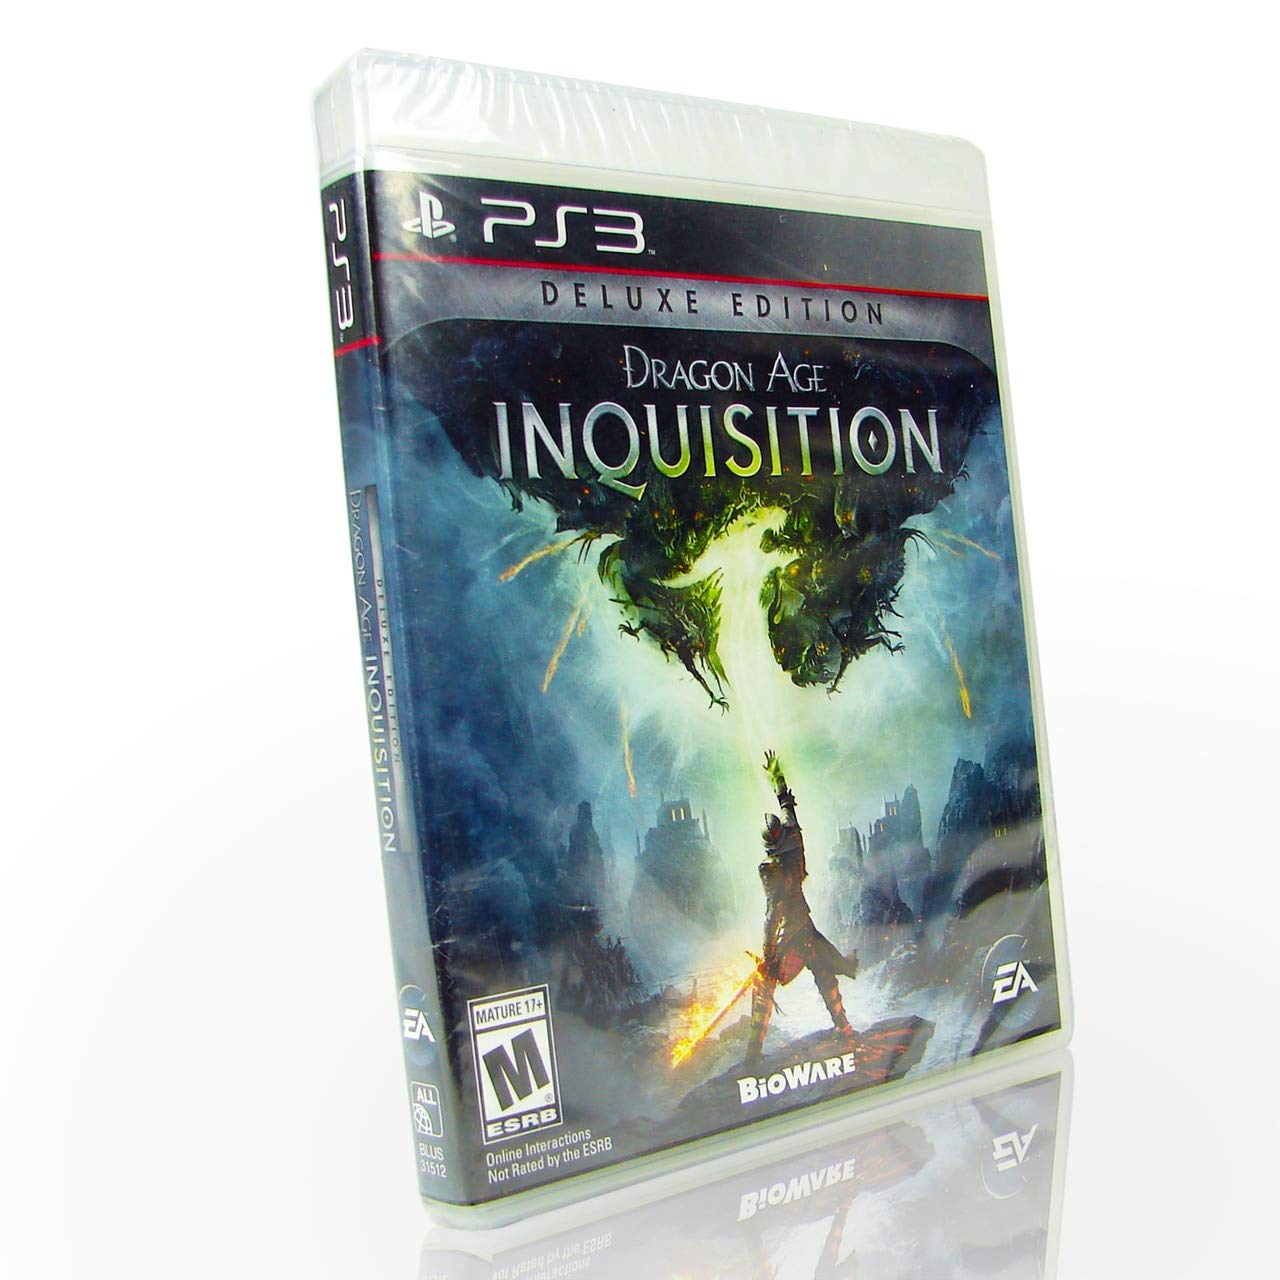 Dragon Age Inquisition - Deluxe Edition - PlayStation 3